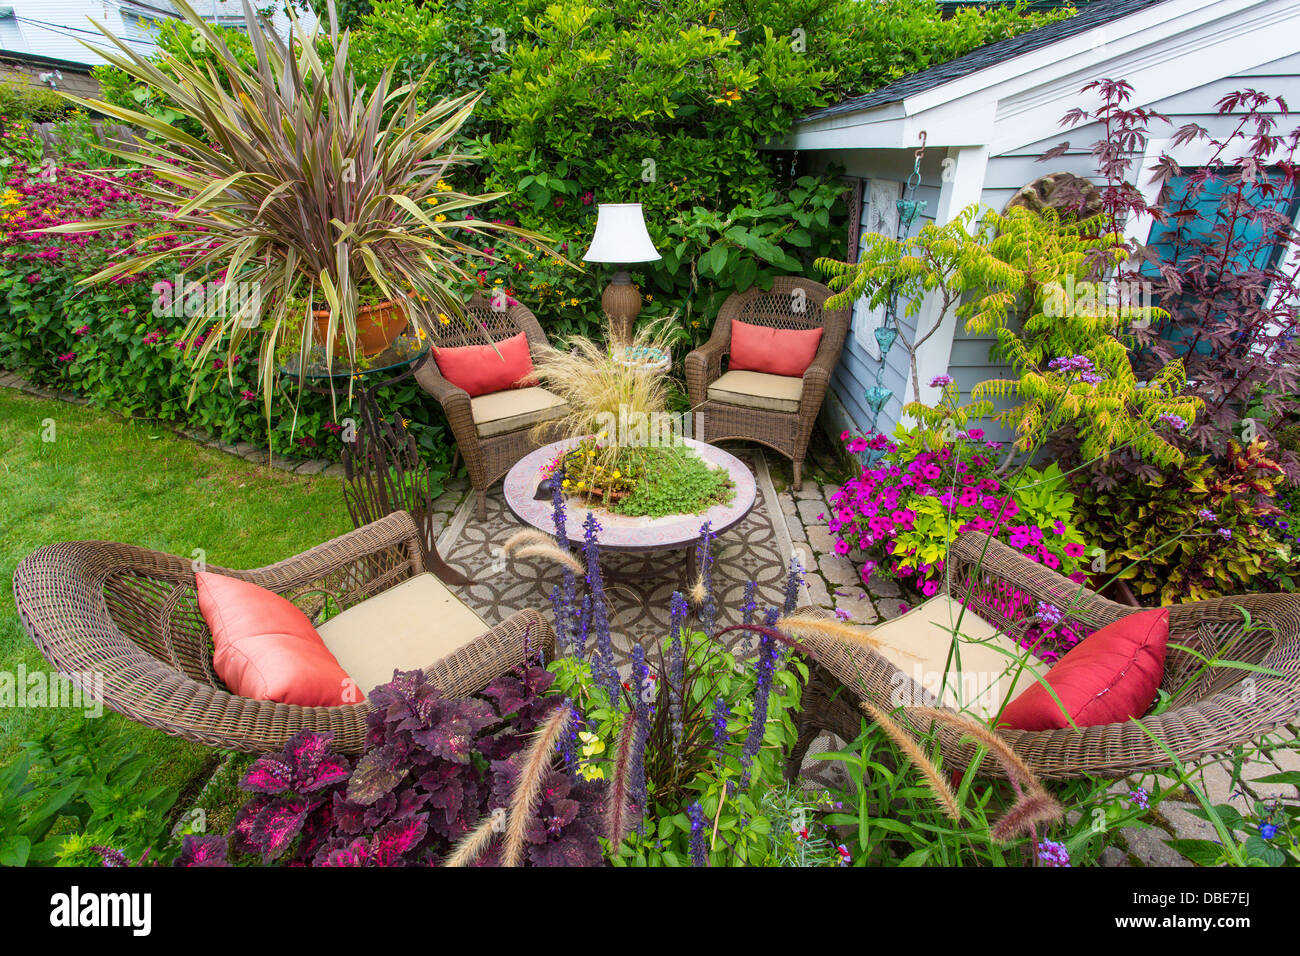 Backyard Sitting Areas Of Gardenwalk Buffalo The Largest Garden Tour In Us And Part Of National Garden Festival In Buffalo Ny Stock Photo Alamy